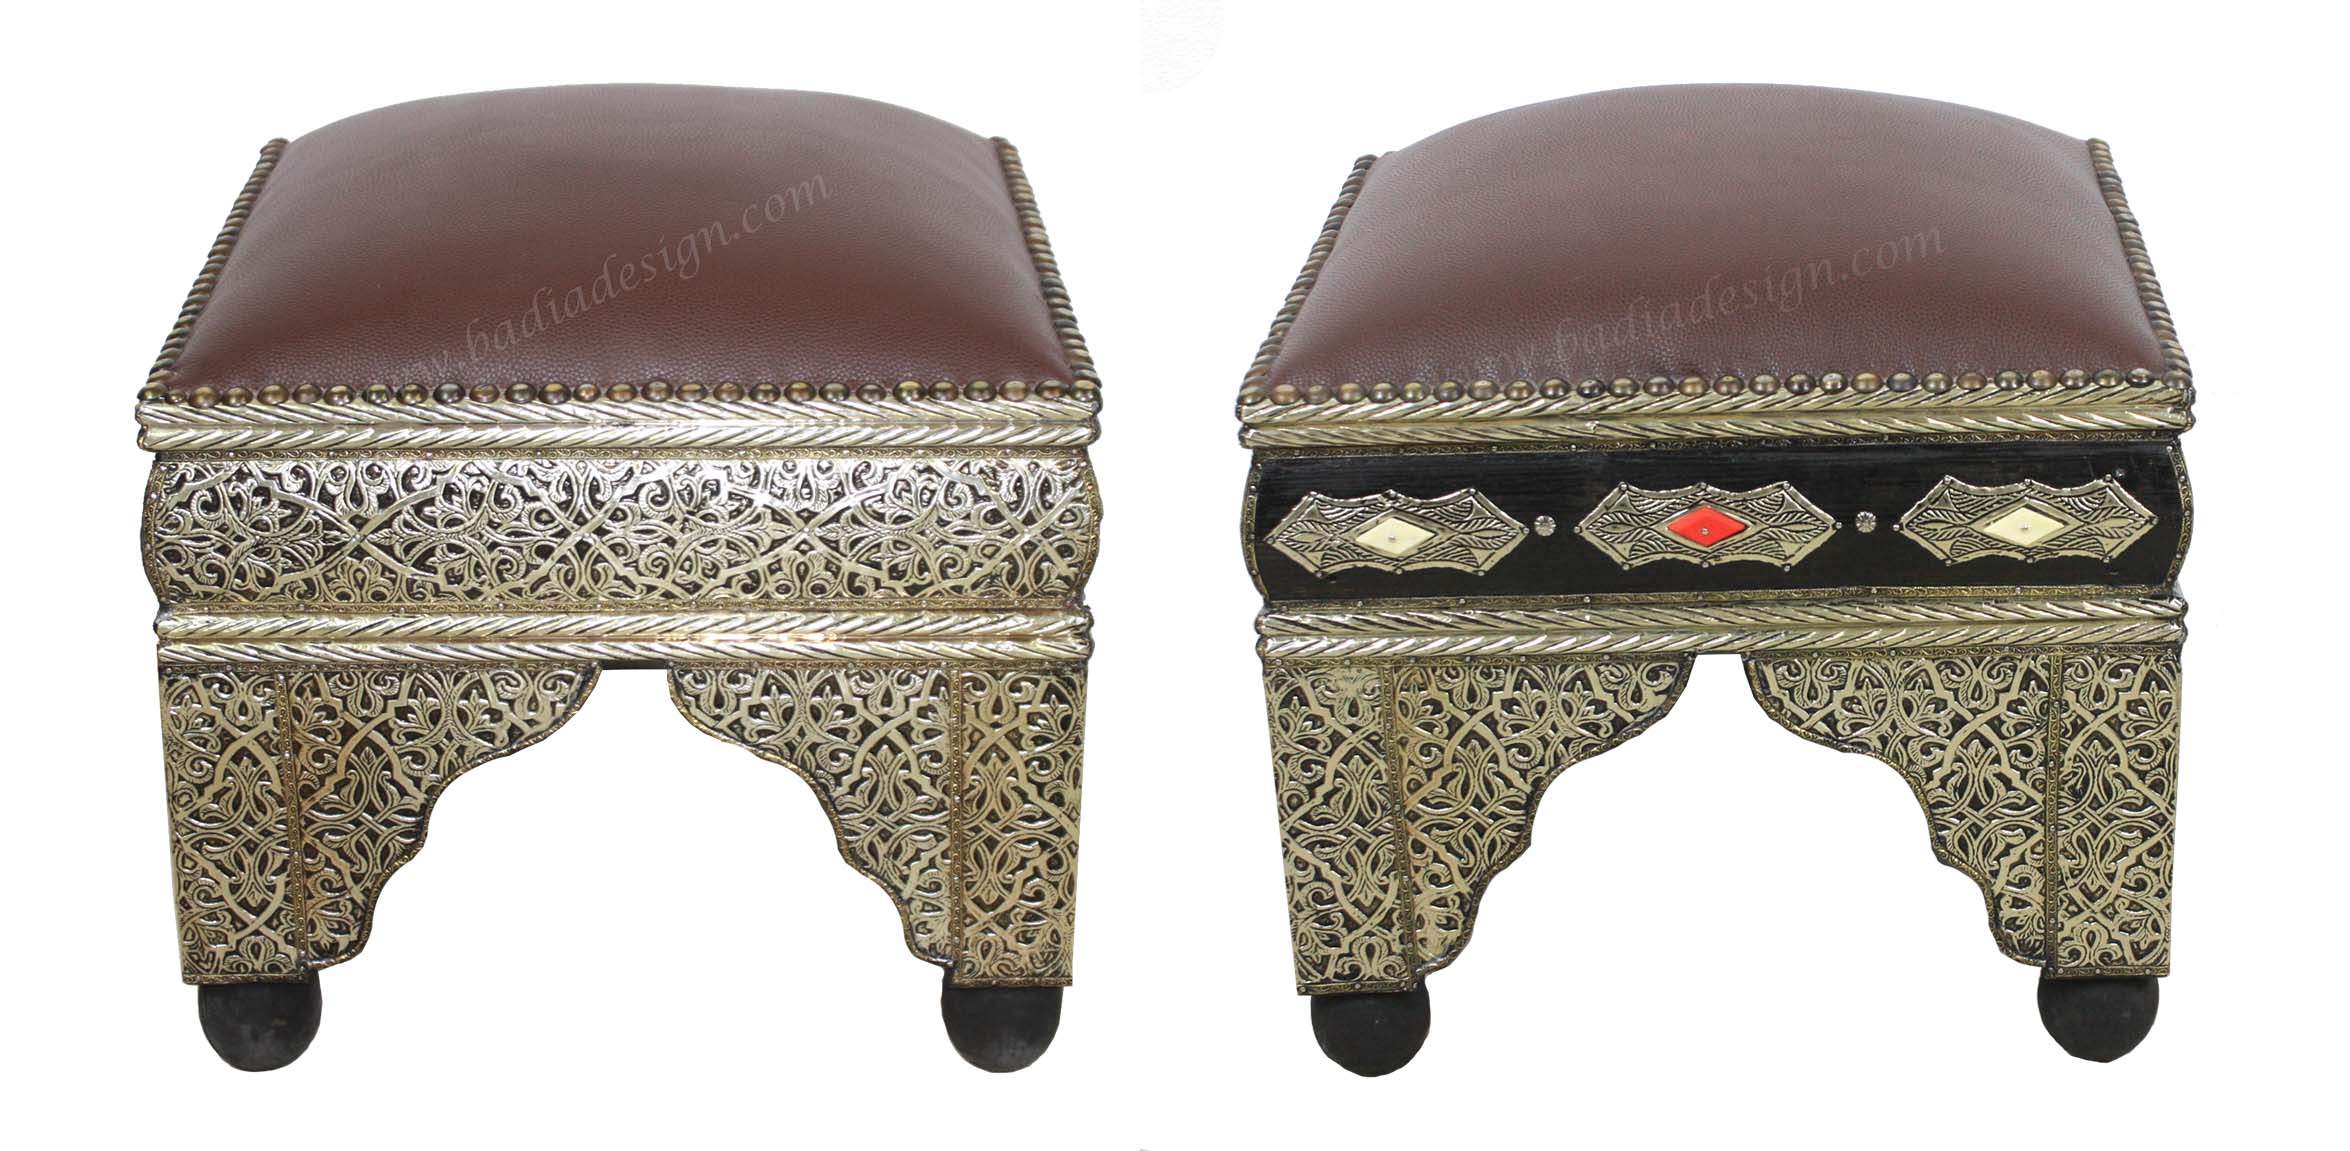 moroccan-leather-ottoman-mb-ch025.jpg